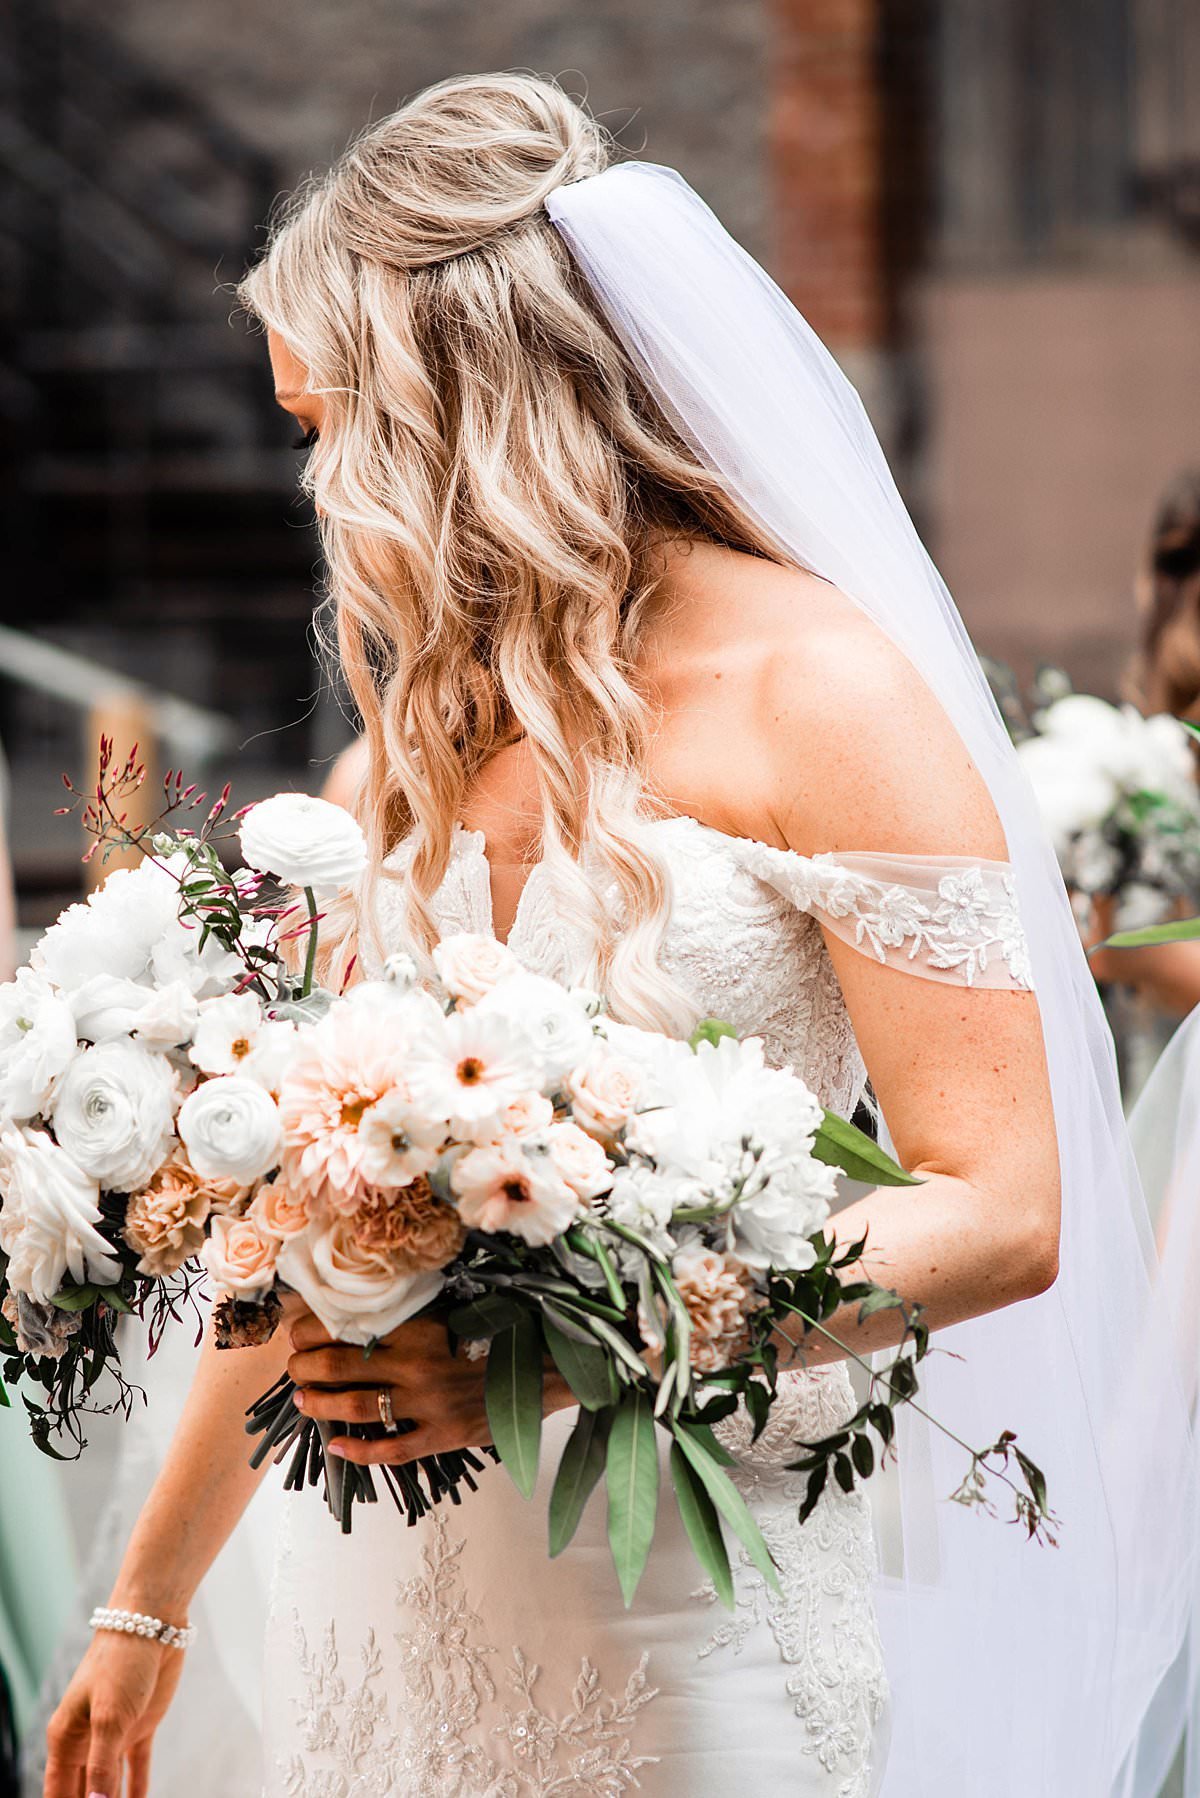 Bride holding her neutral colored bouquet and looking away from camera over her shoulder towards her bridesmaids